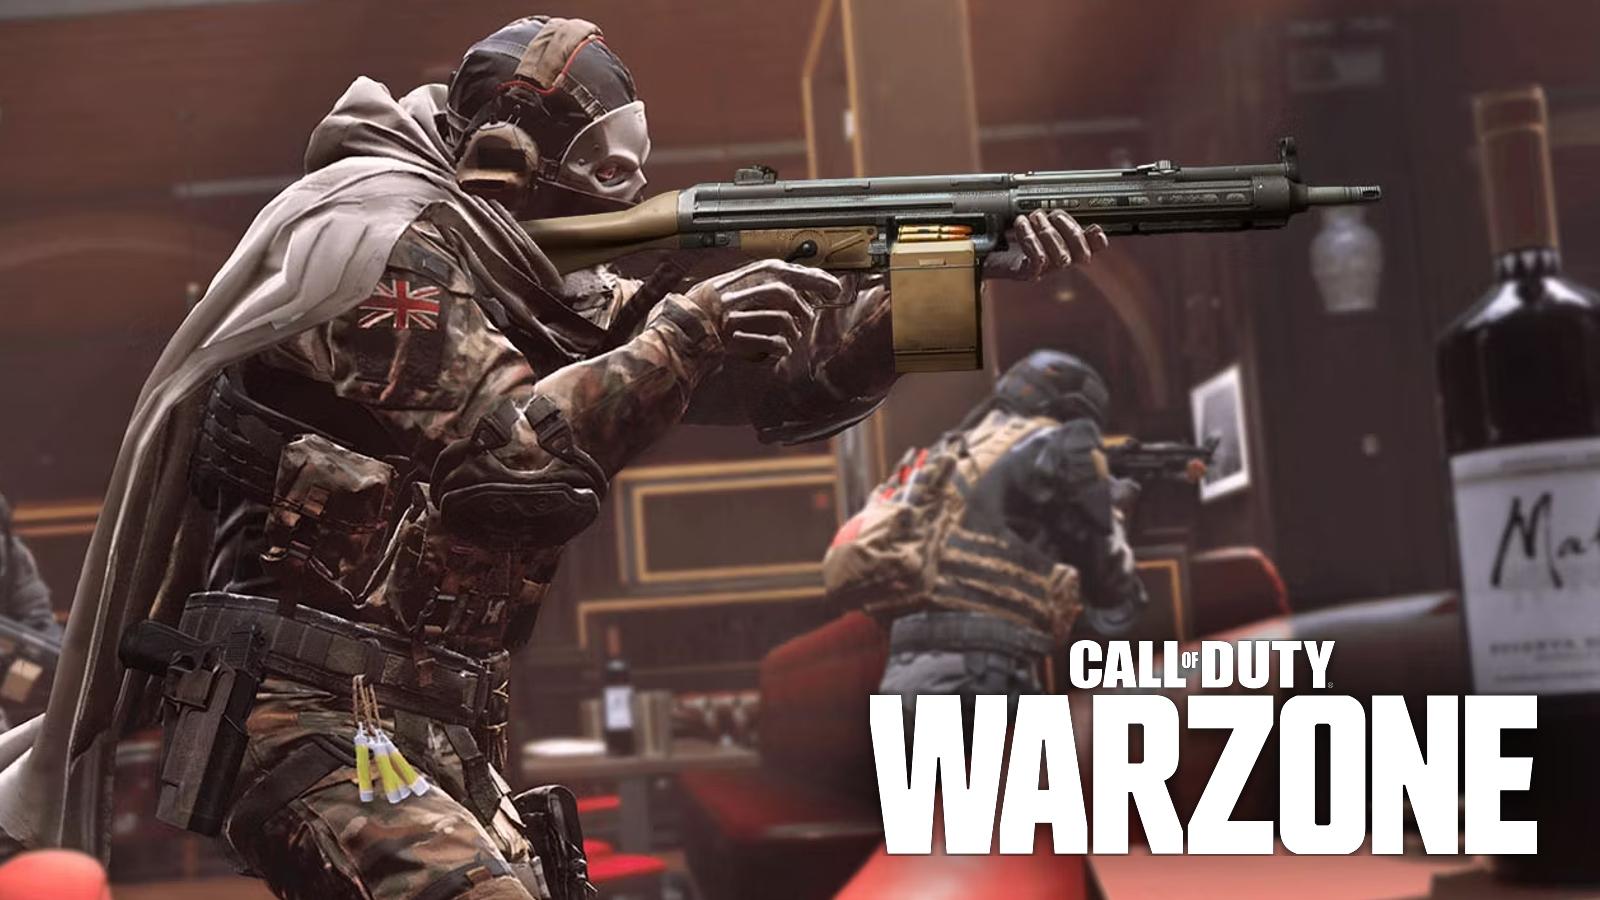 Warzone operator using Rapp H LMG with Call of Duty Warzone logo in bottom right corner